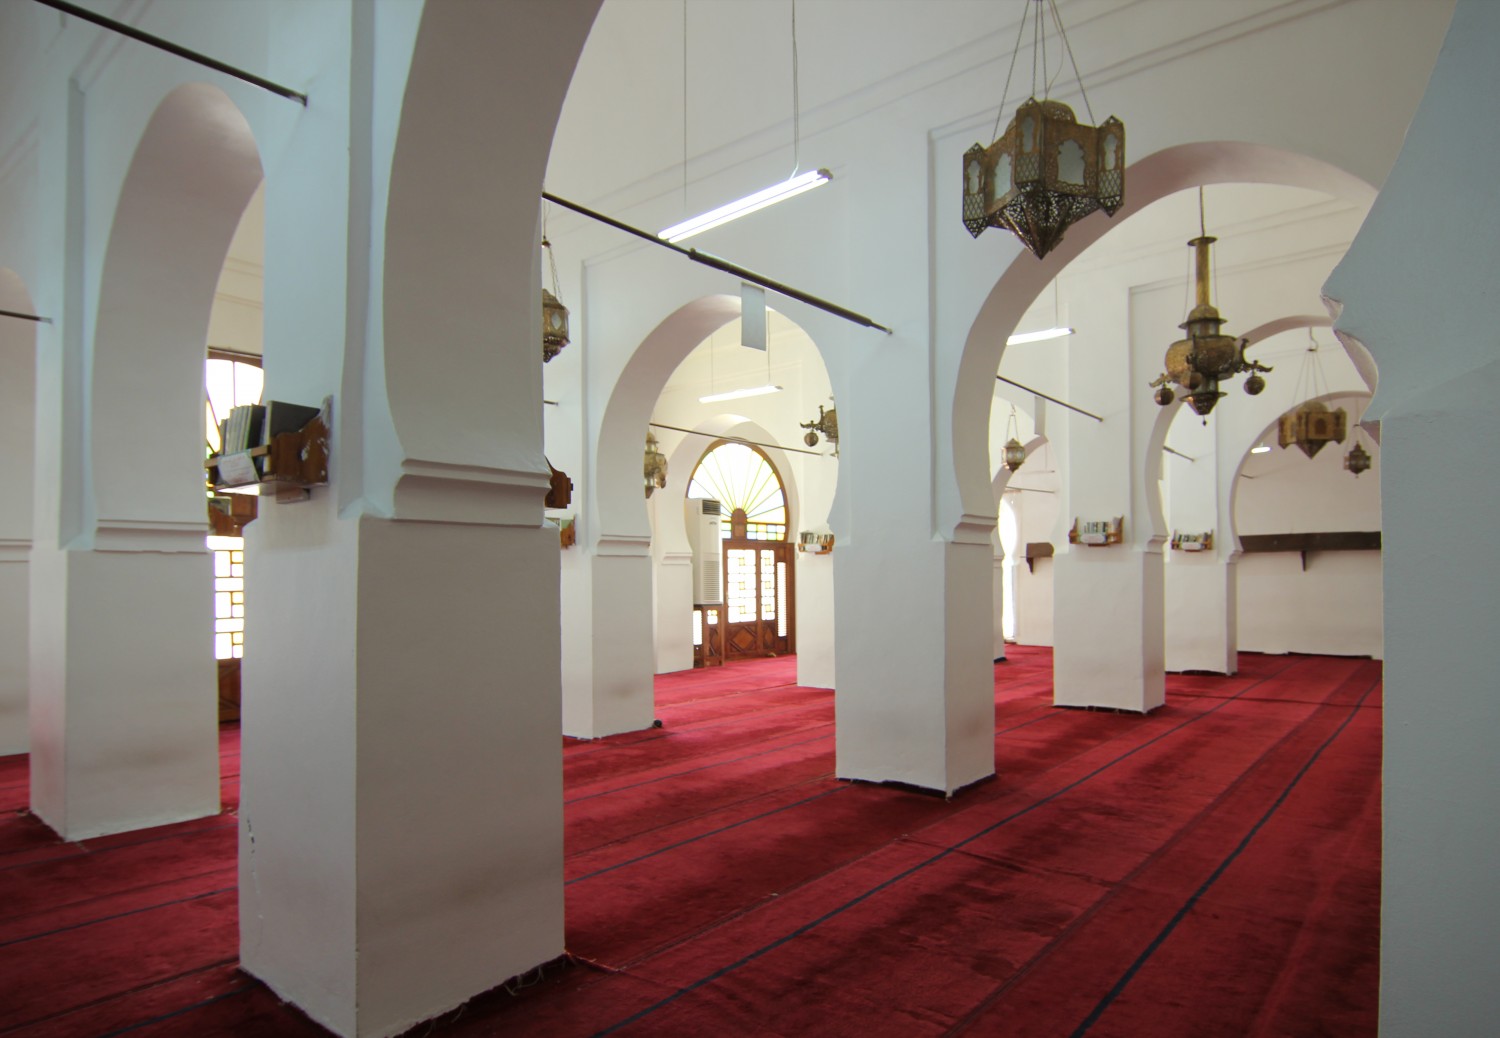 View of the prayer hall